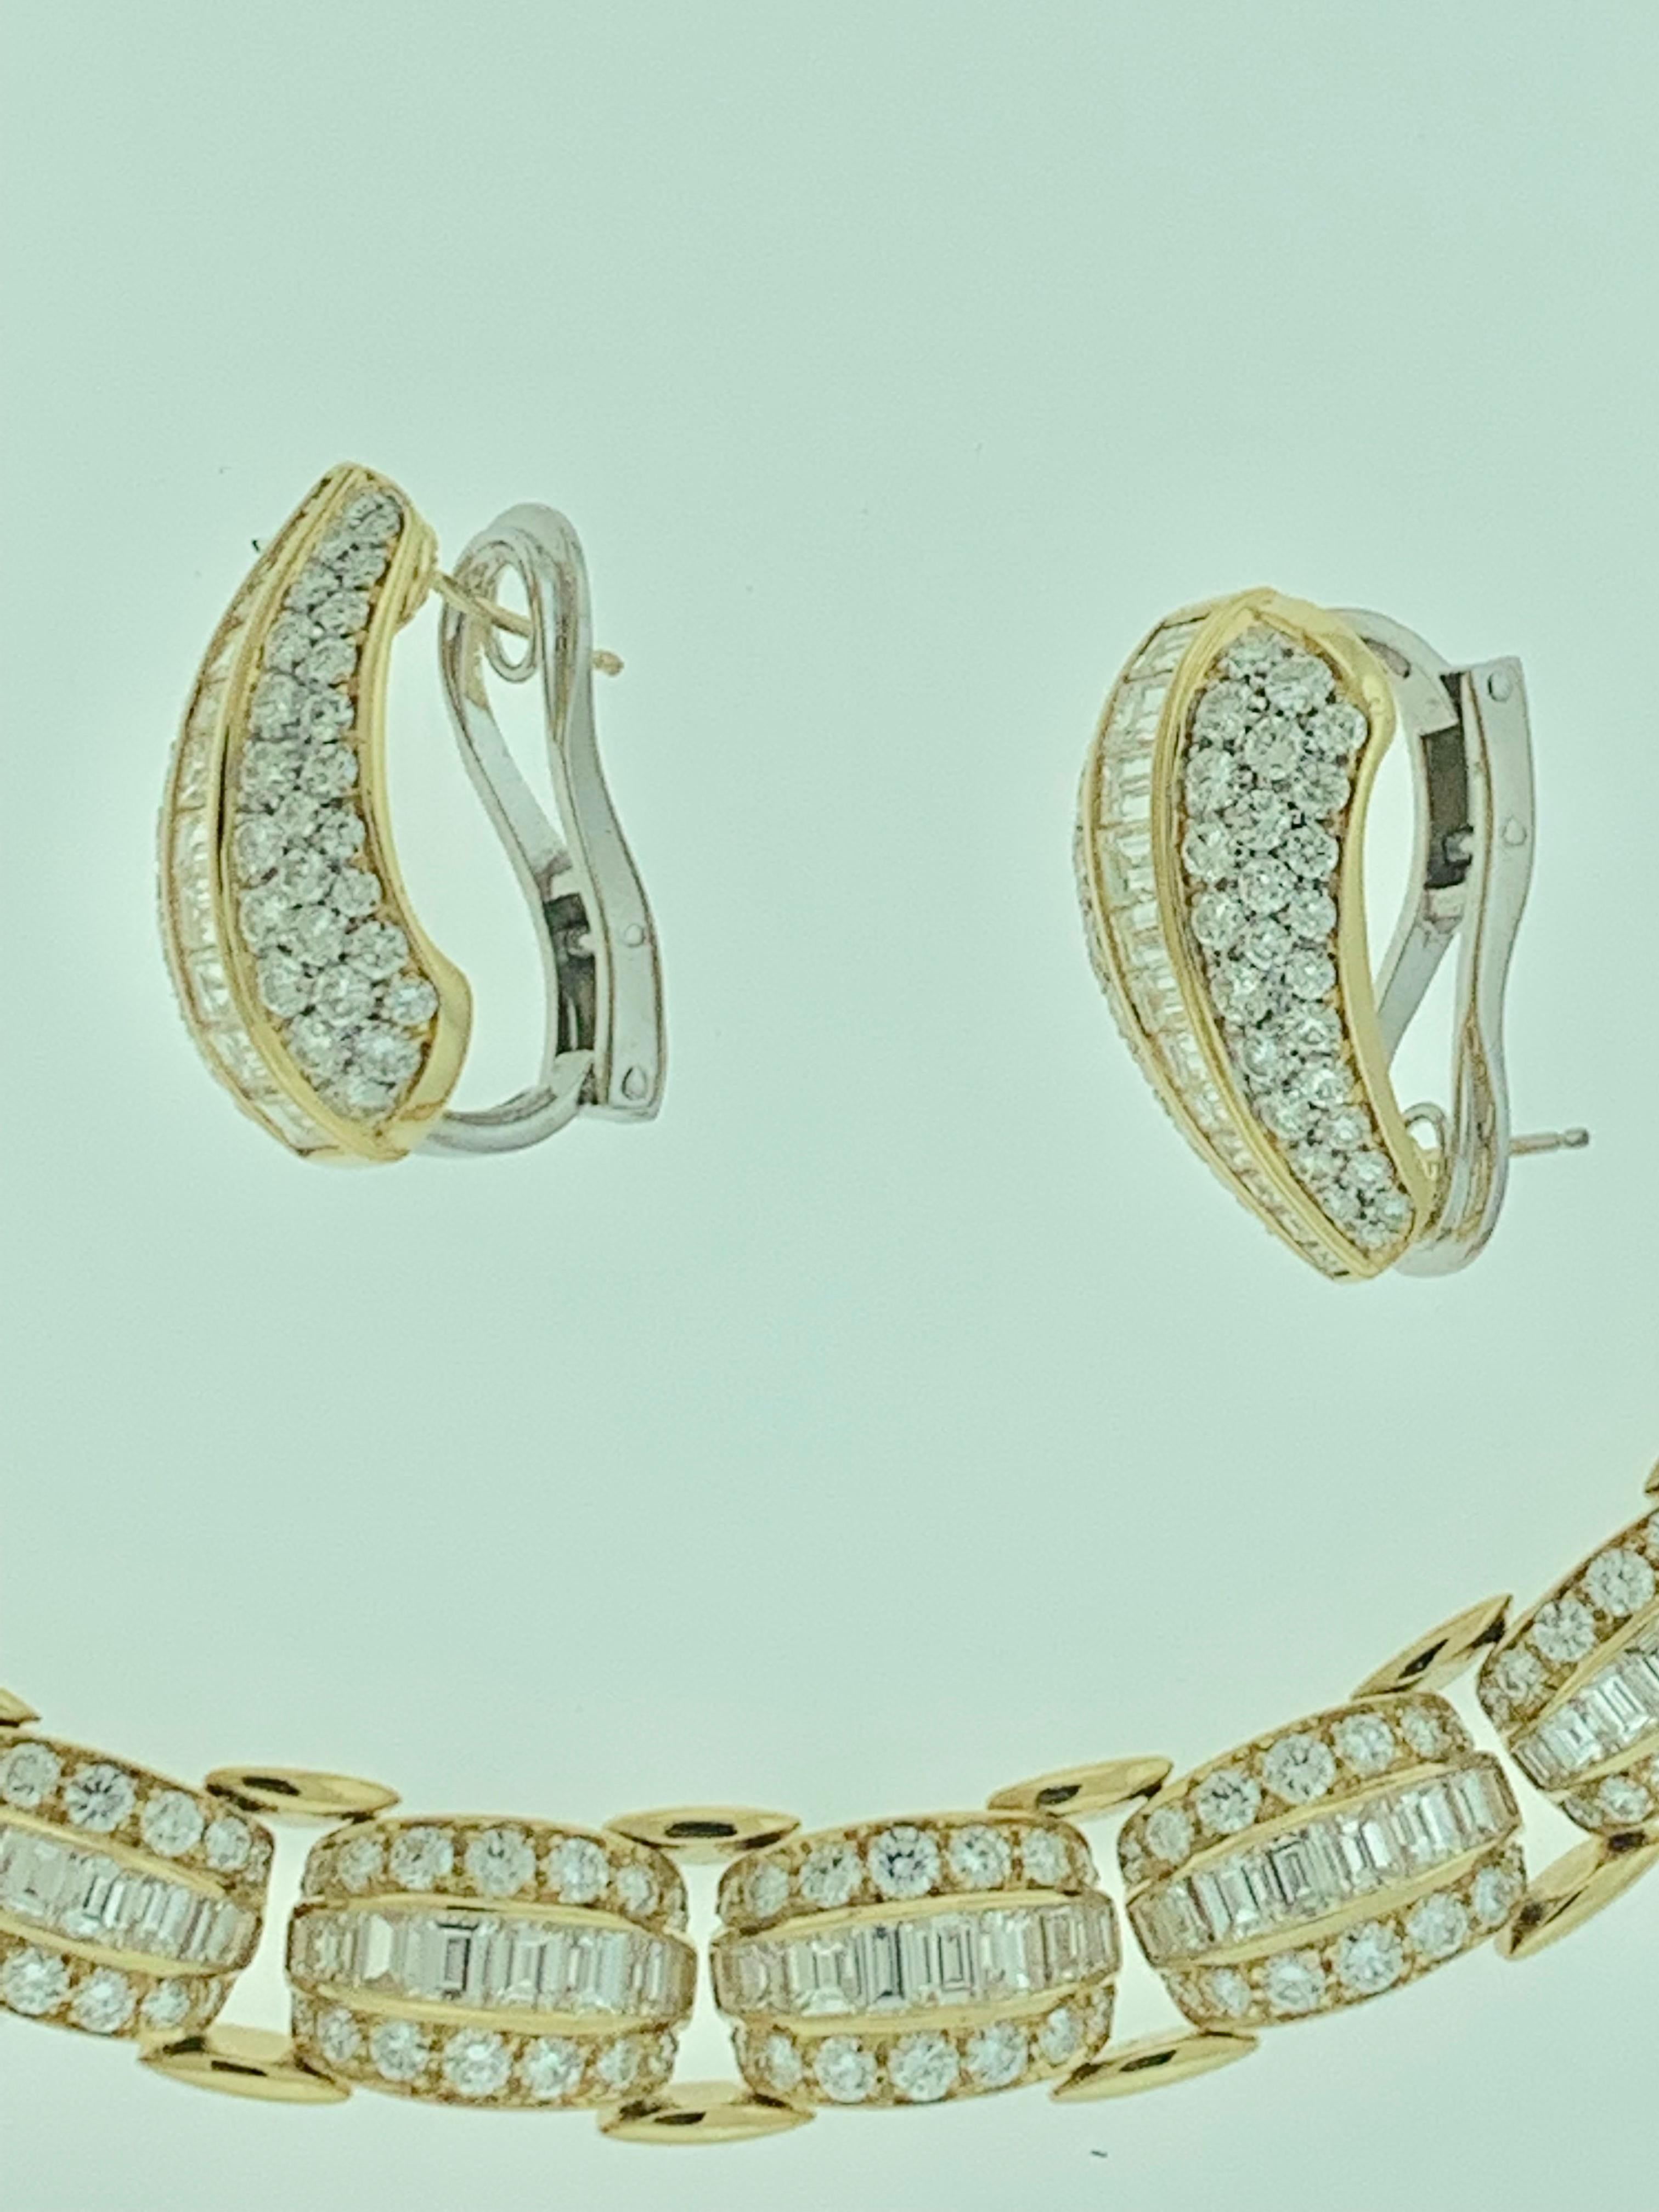 23 Ct Diamond Necklace & Earrings Bridal Suite by Star Forest 105 Gm 18 K Gold 3